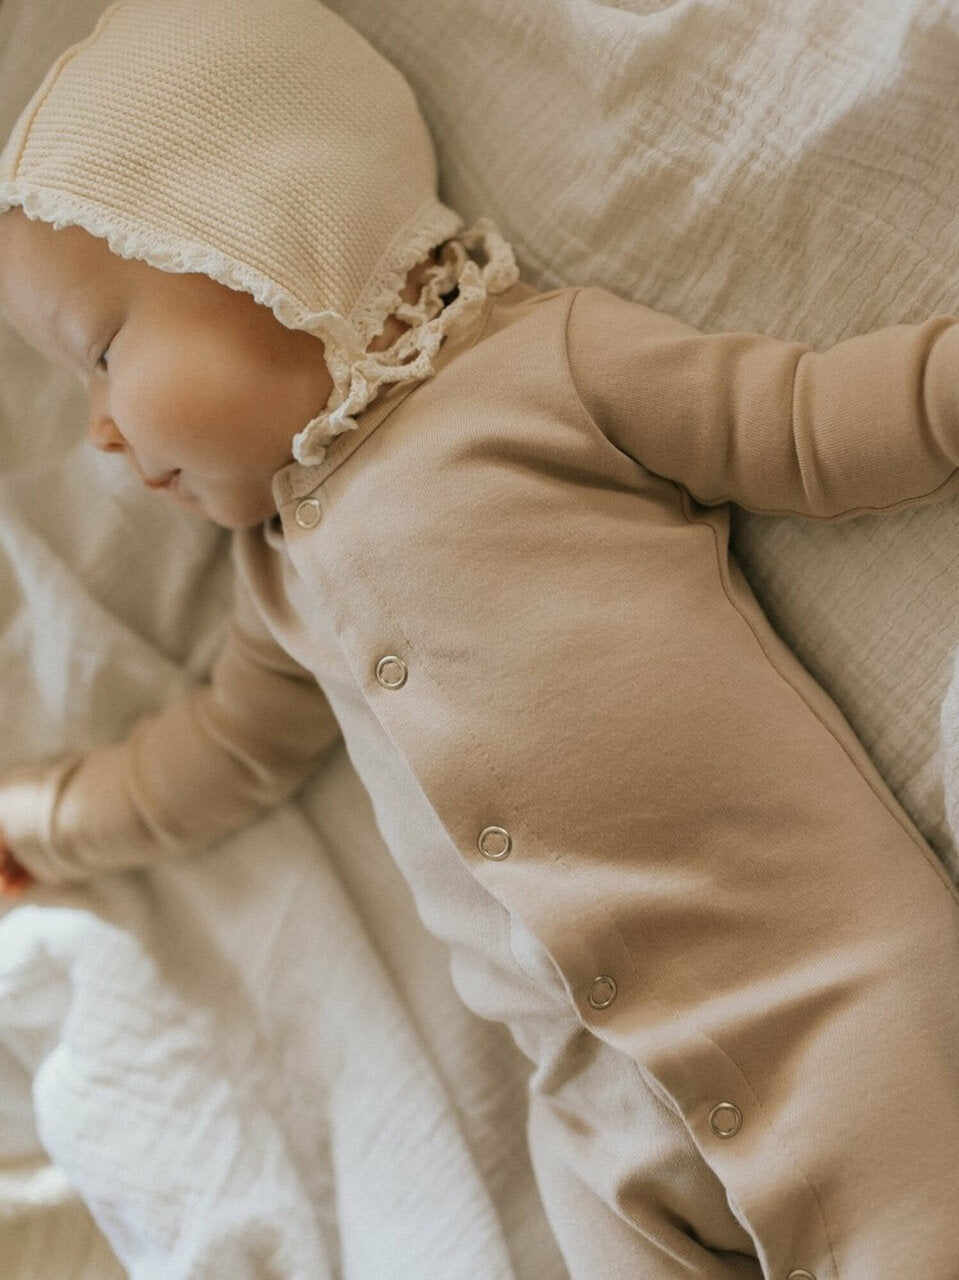 Child wearing Organic Snap Footie in Oatmeal. Credit: @montanaleephotography